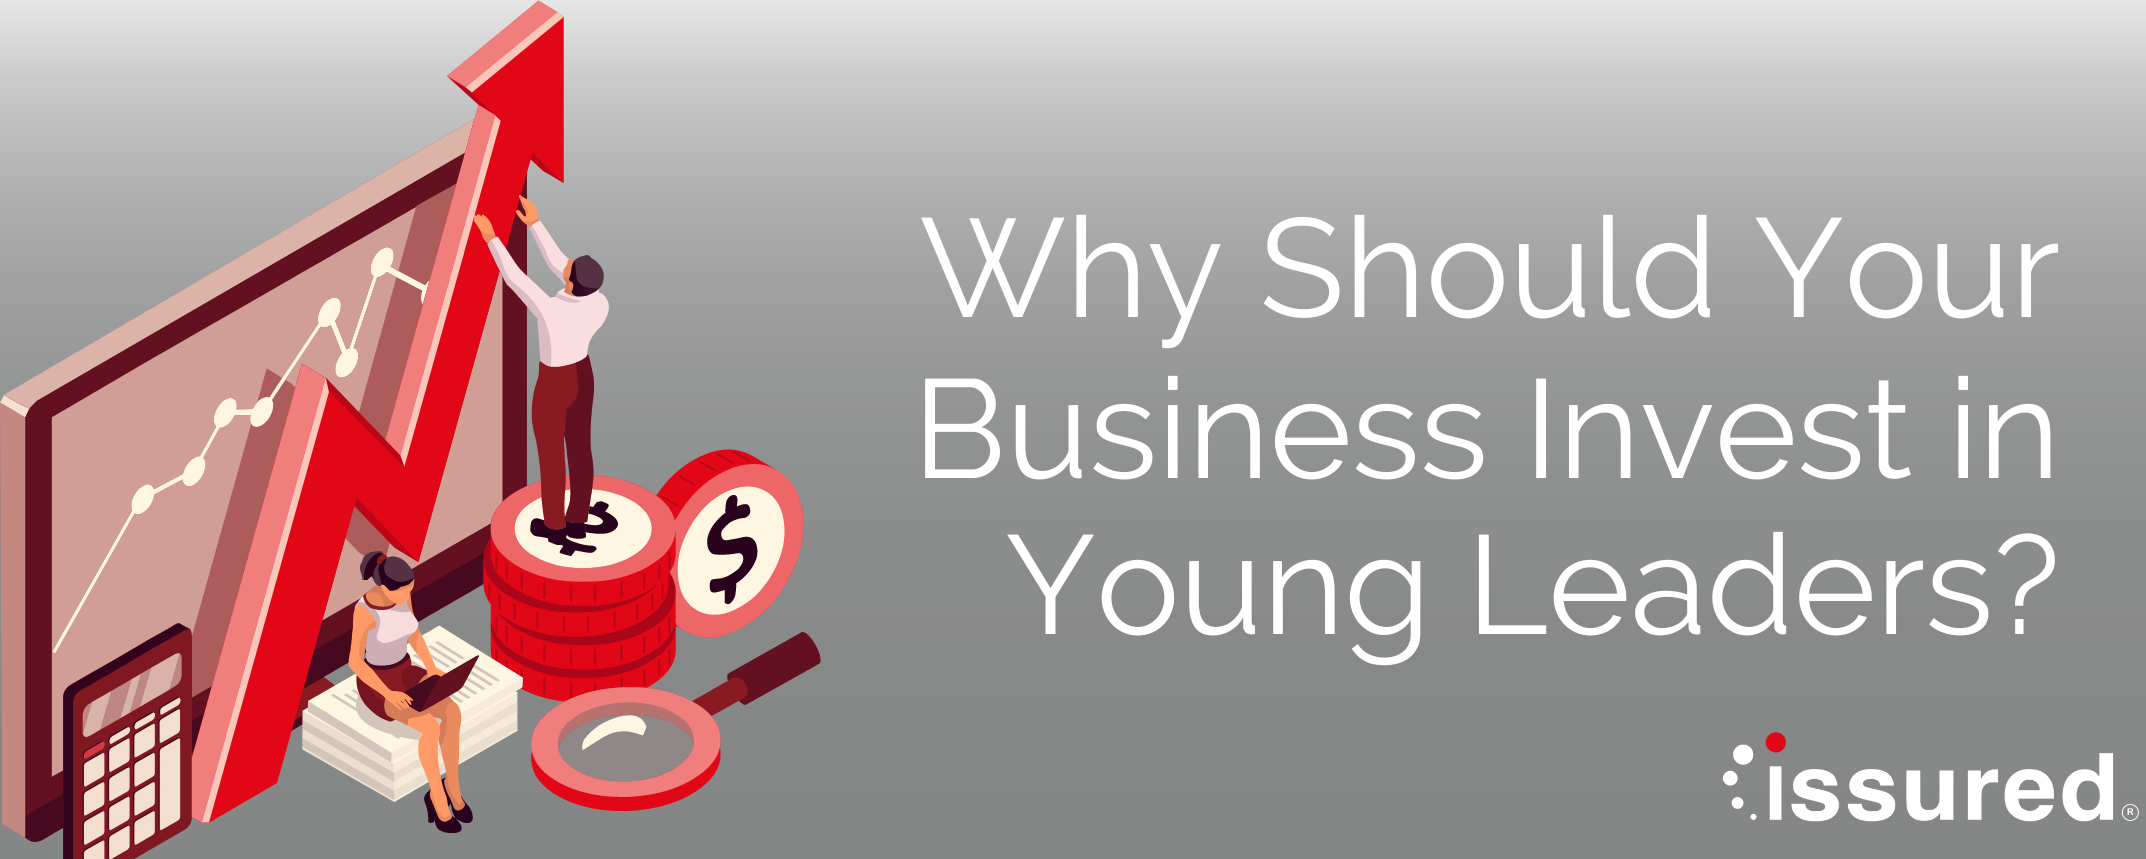 Why Should Your Business Invest In Young Leaders? | Digital Transformation Specialists | Issured Ltd